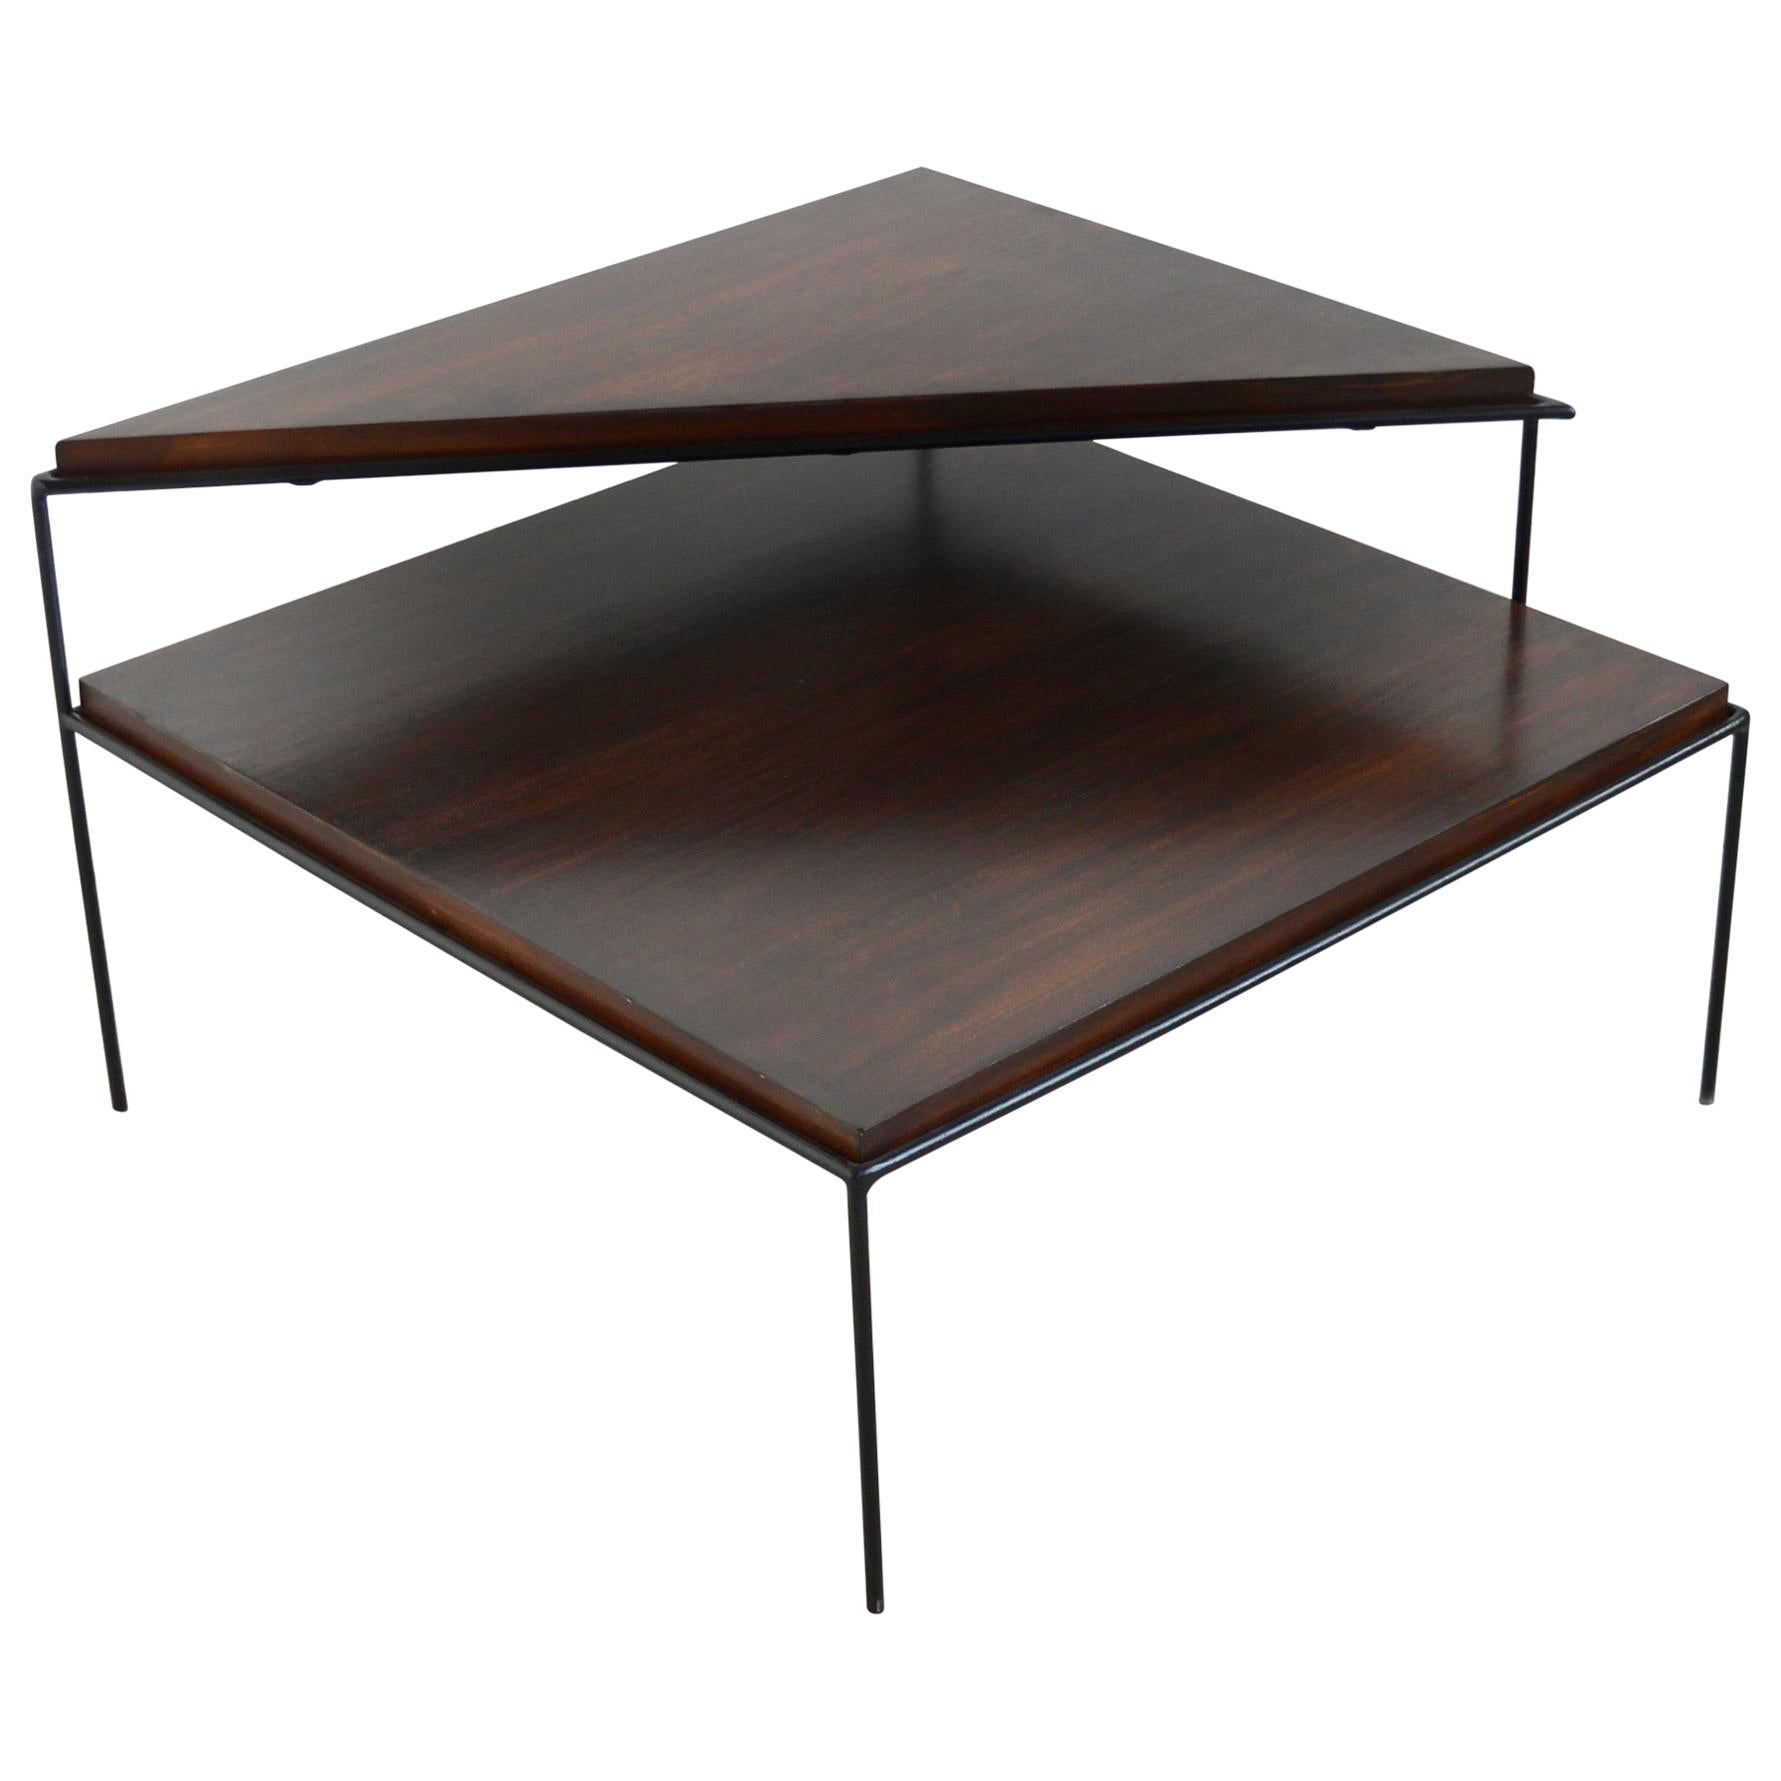 Paul McCobb Two-Tier Corner Table with Iron Frame